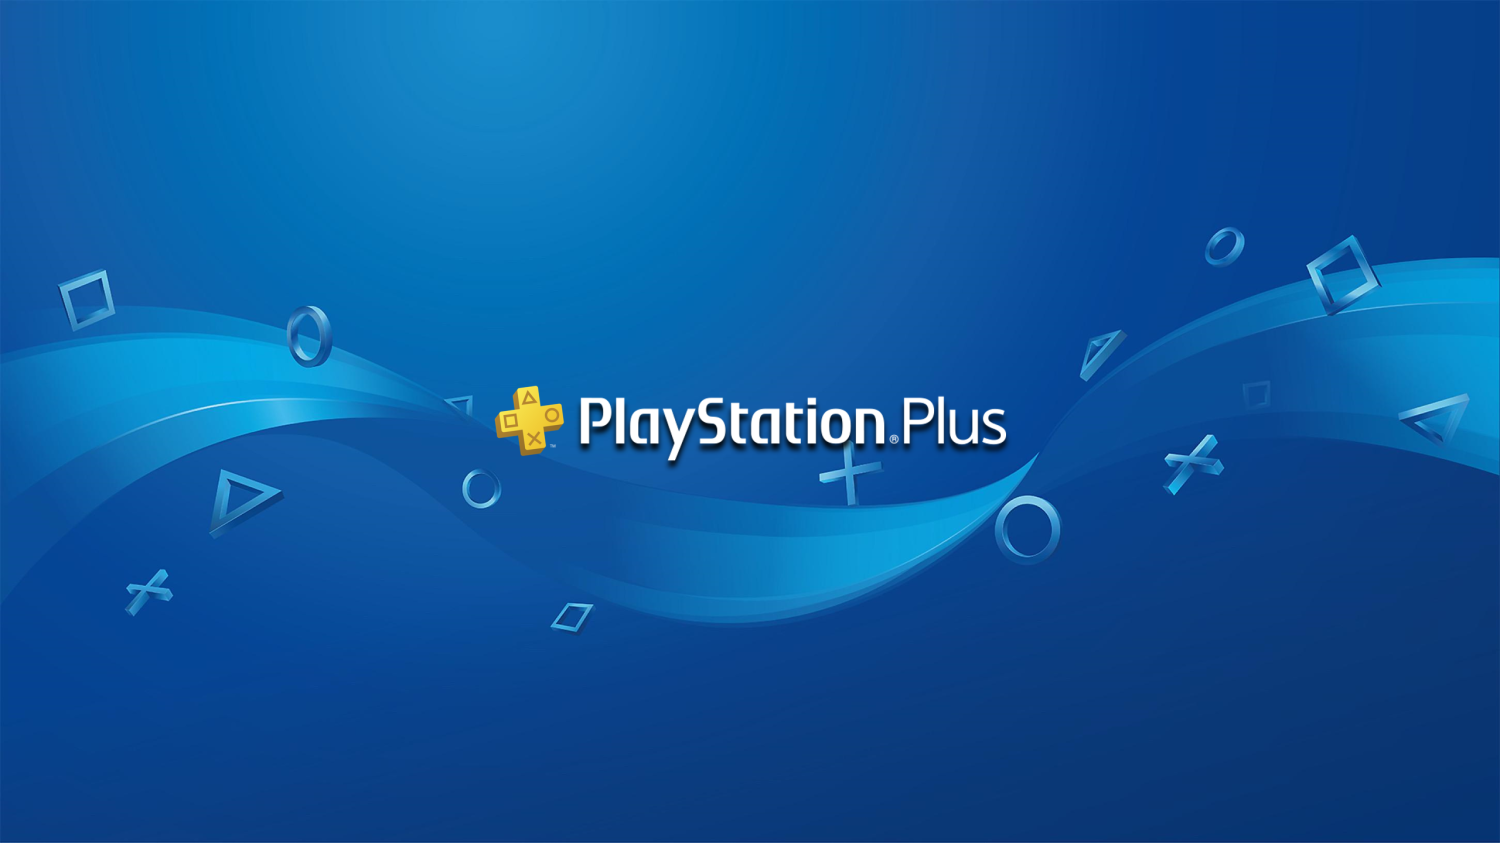 Don't buy Sony's yearly PS Plus Extra subscription, and here's why